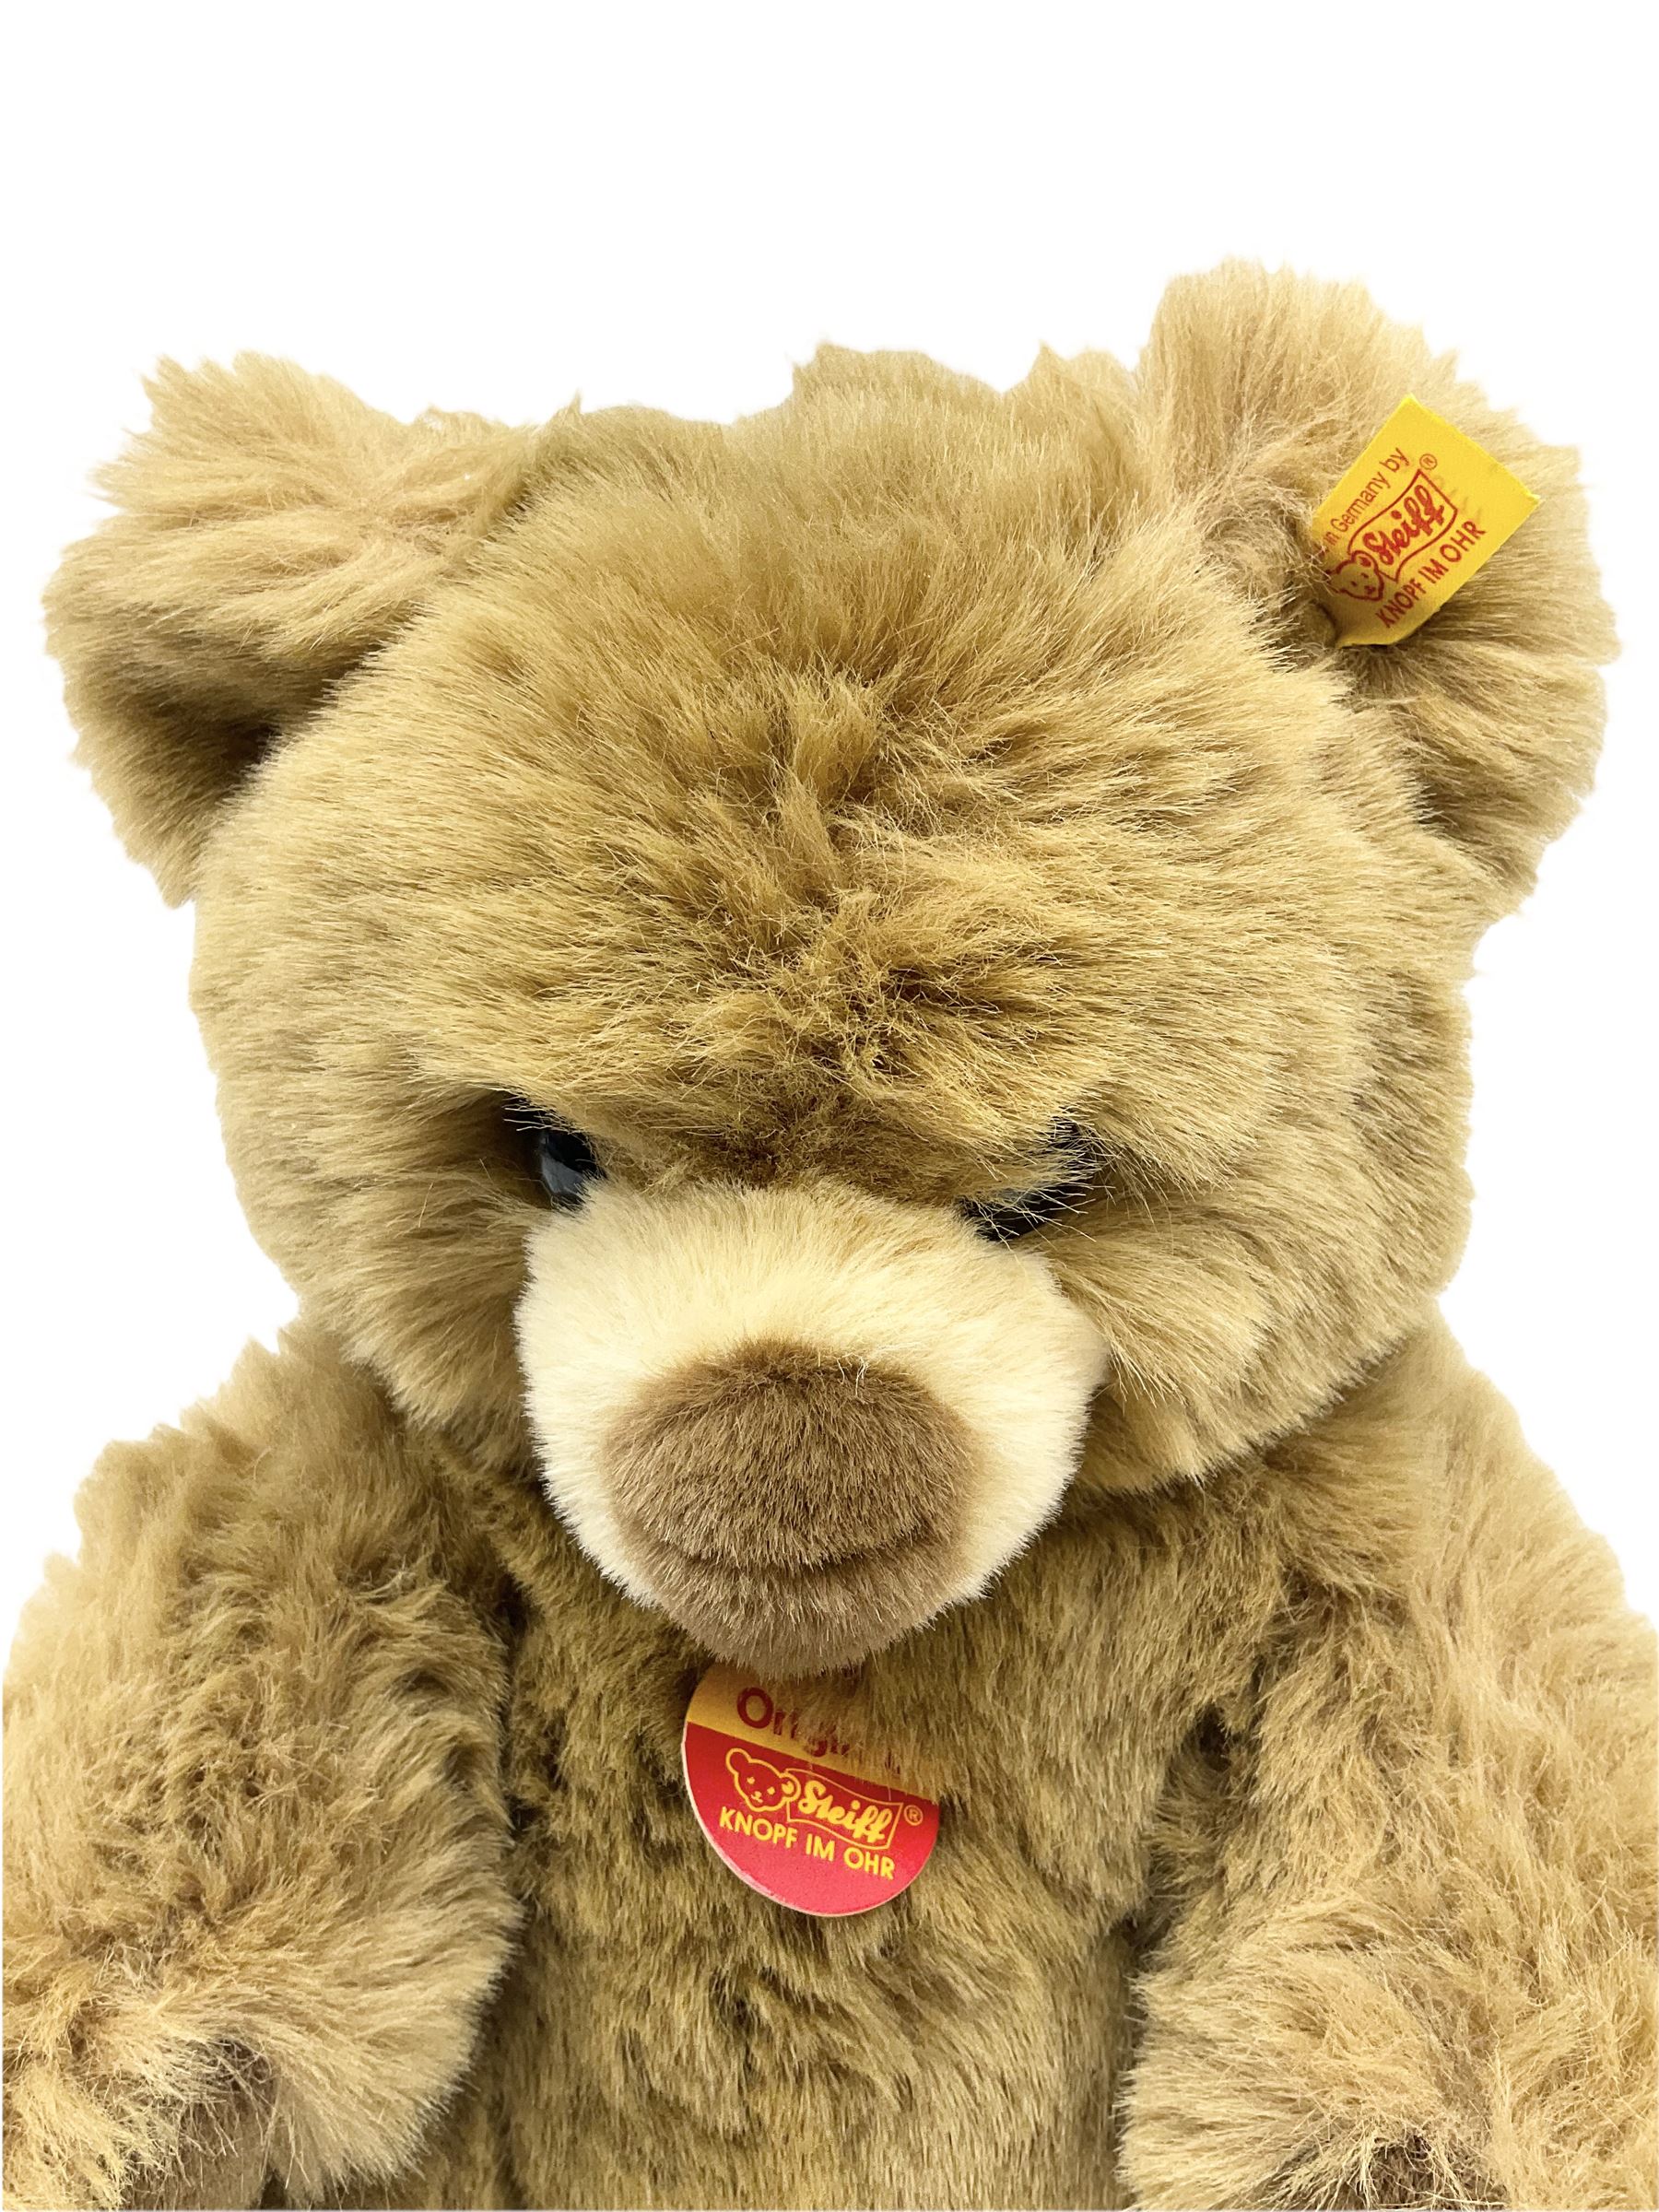 Five modern collector's teddy bears - Steiff 2001 bear No.660177 with tags; Hermann limited edition - Image 3 of 8